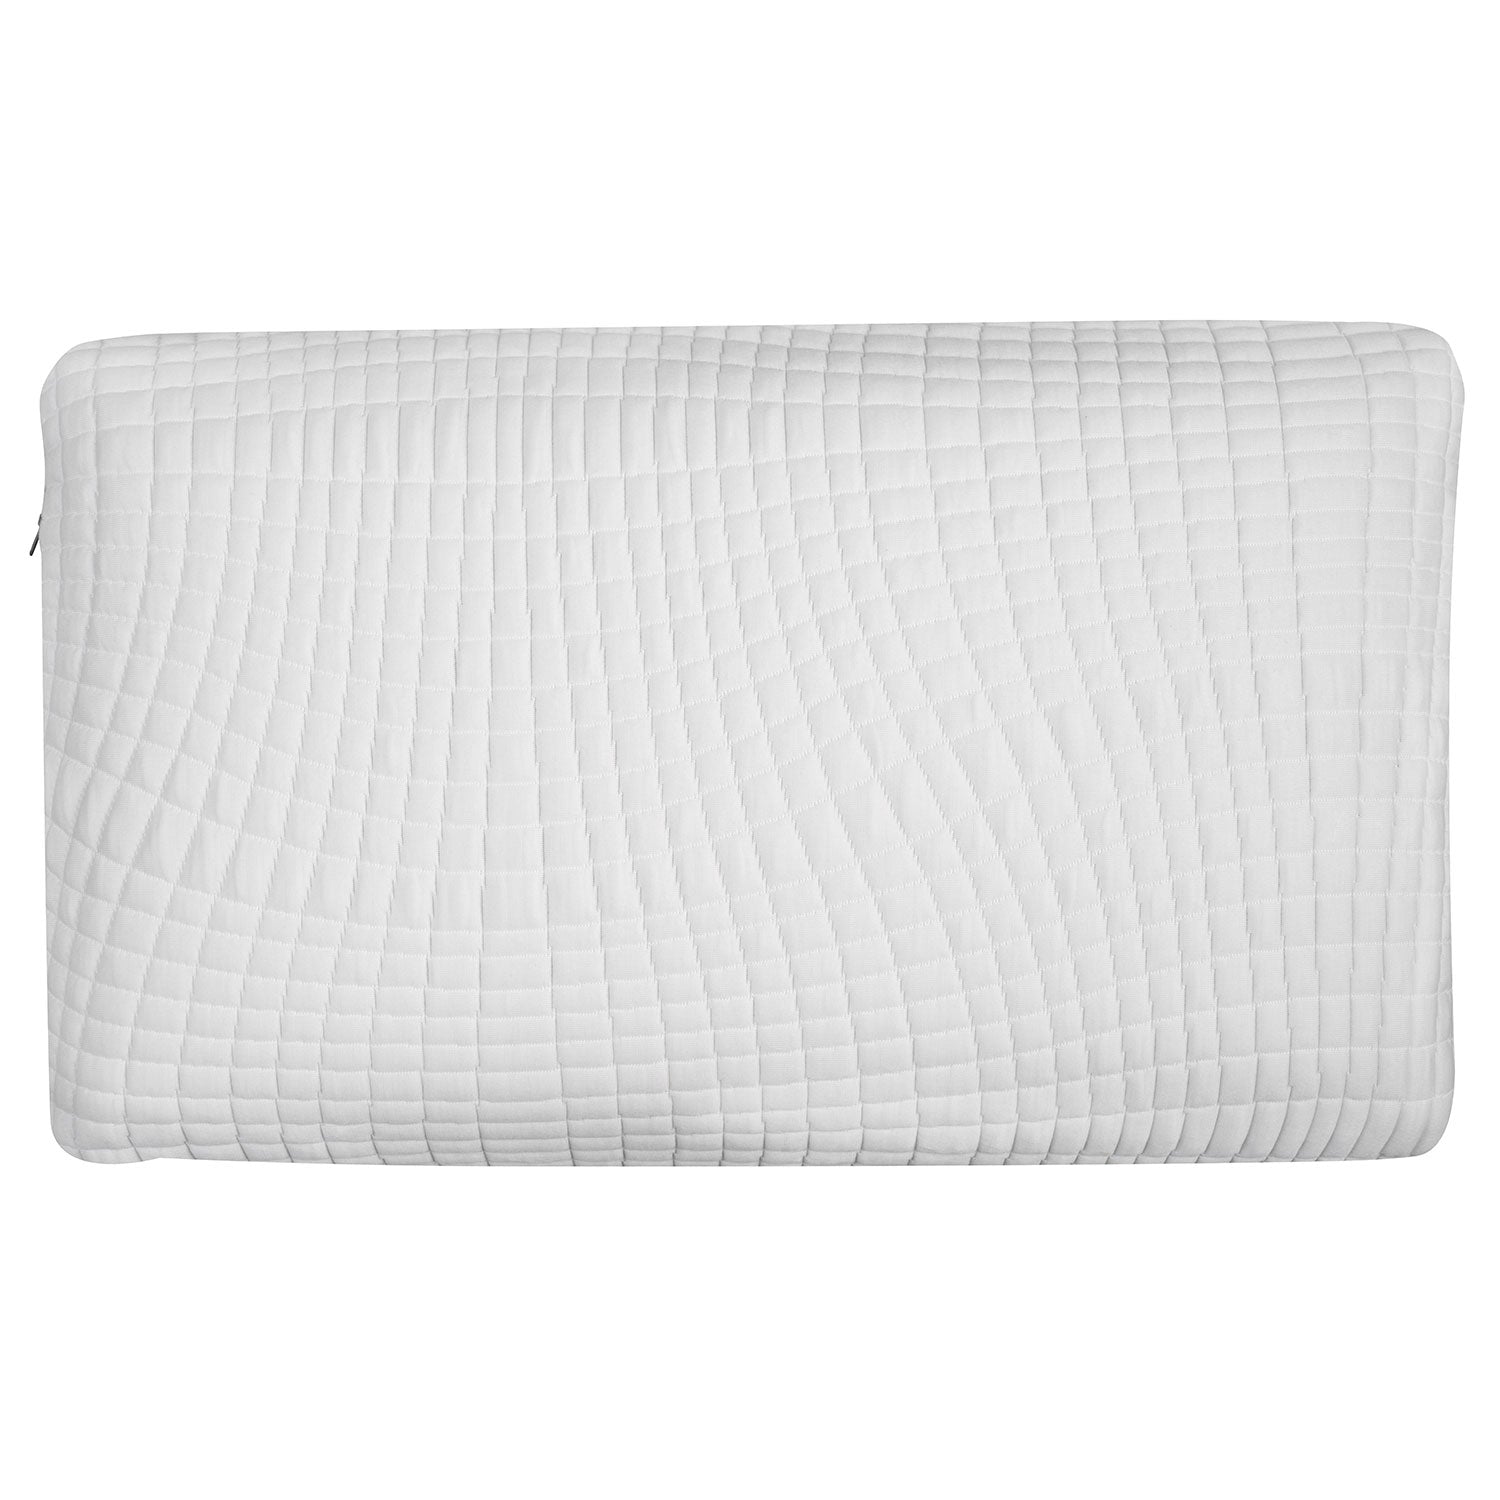 Ventilated Charcoal Bamboo Infused Memory Foam Pillow - Washable Cover - BlissfulNights.com